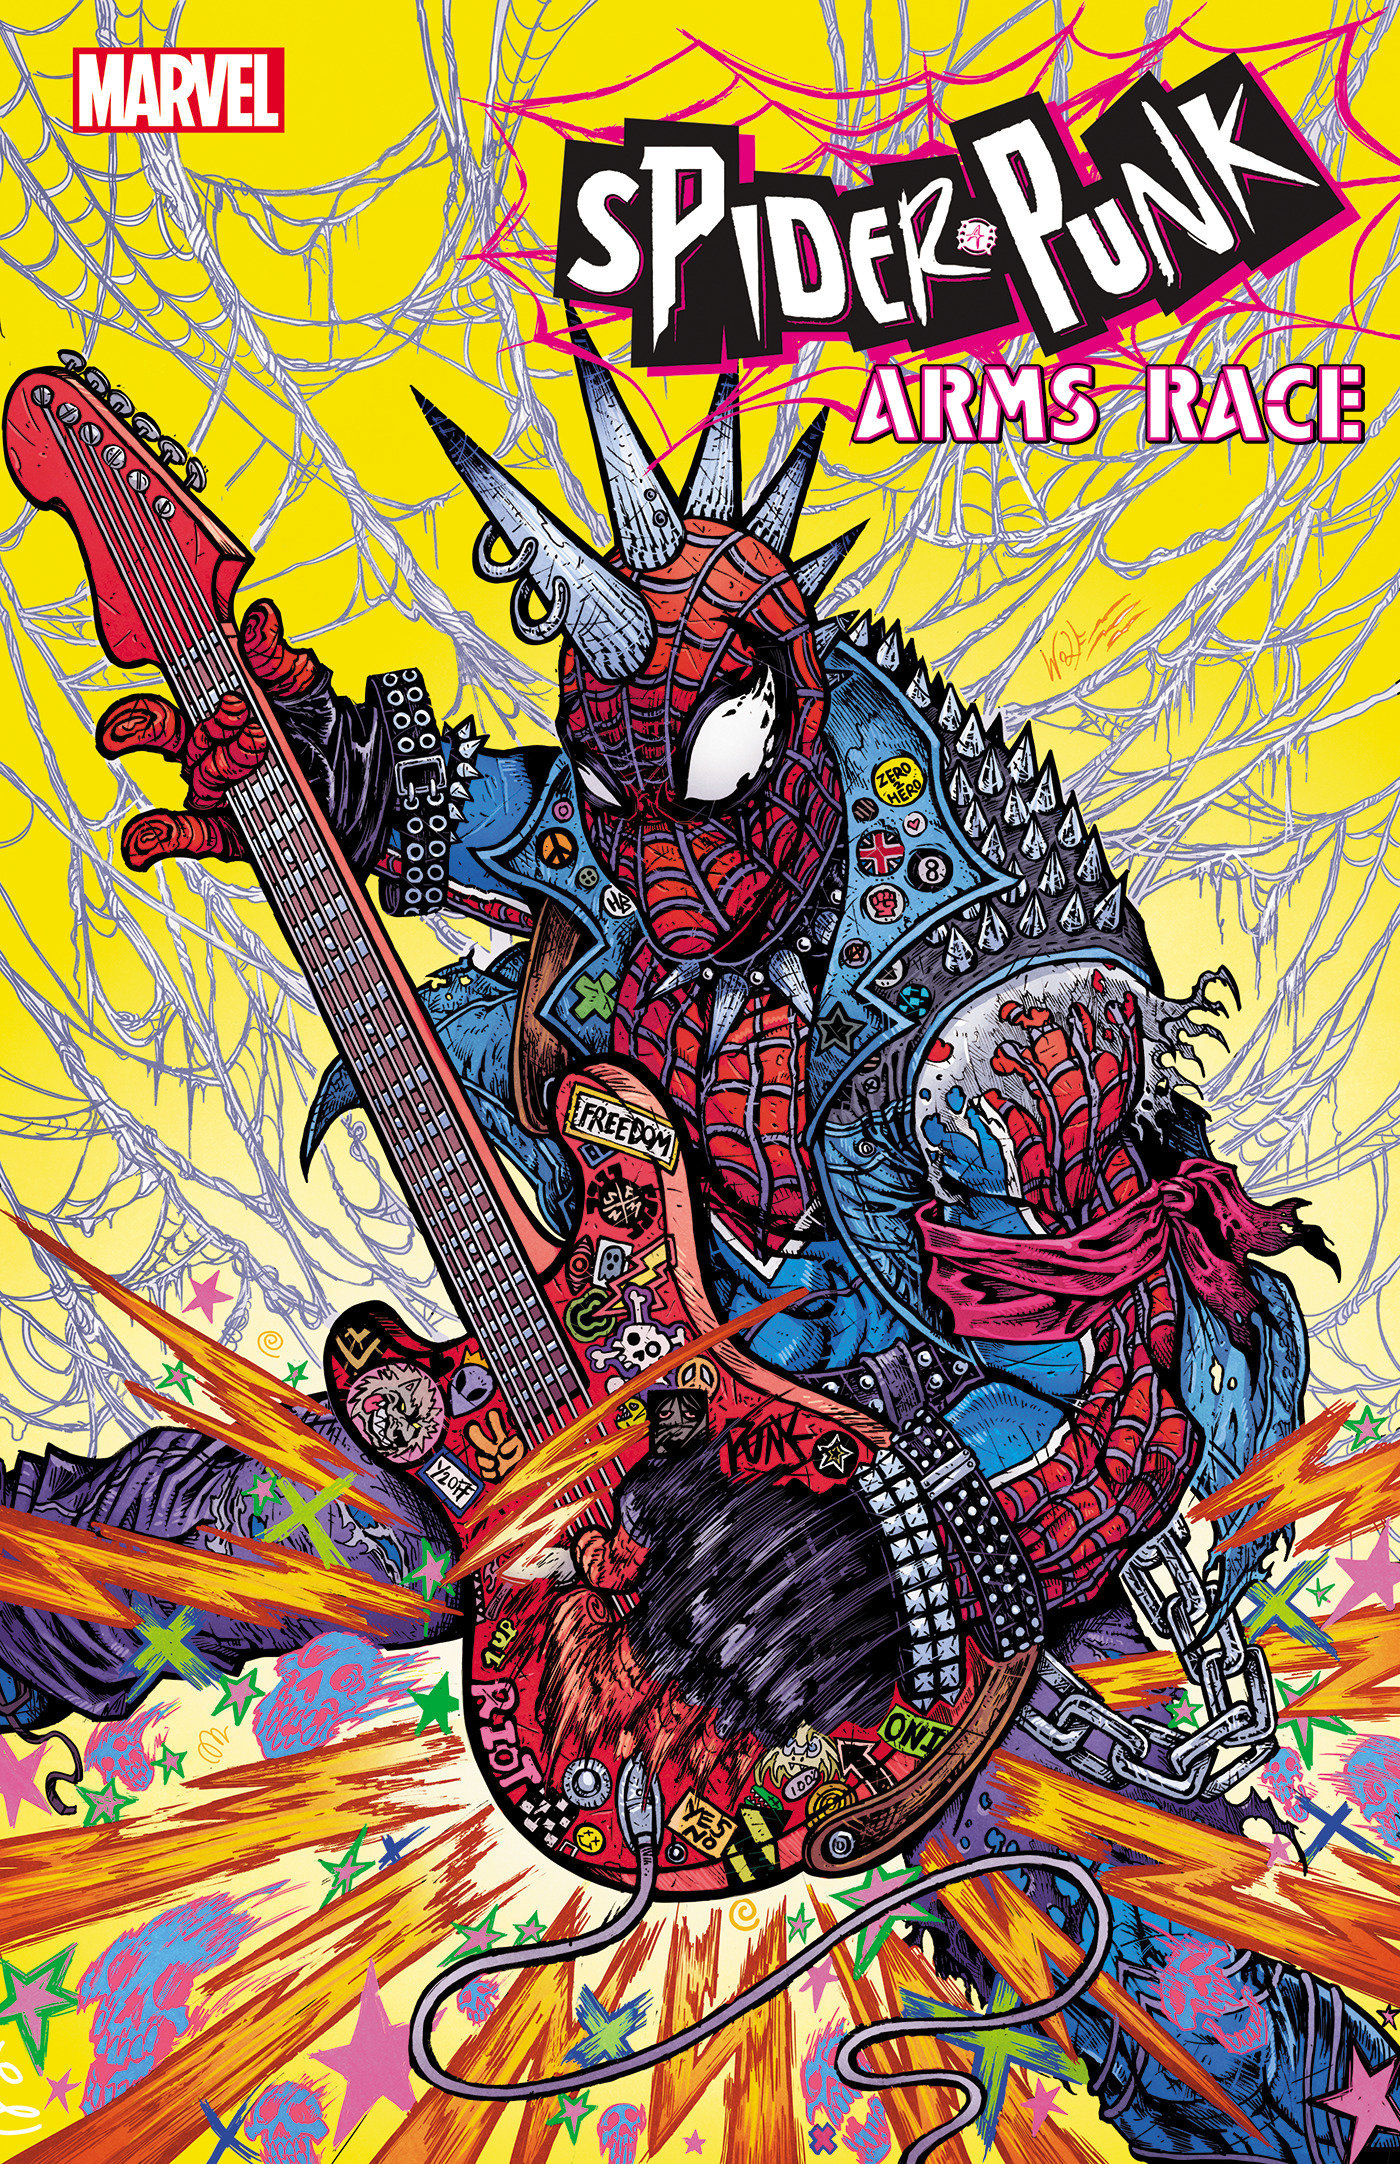 Spider-Punk: Arms Race #1 Maria Wolf Variant 1 for 25 Incentive